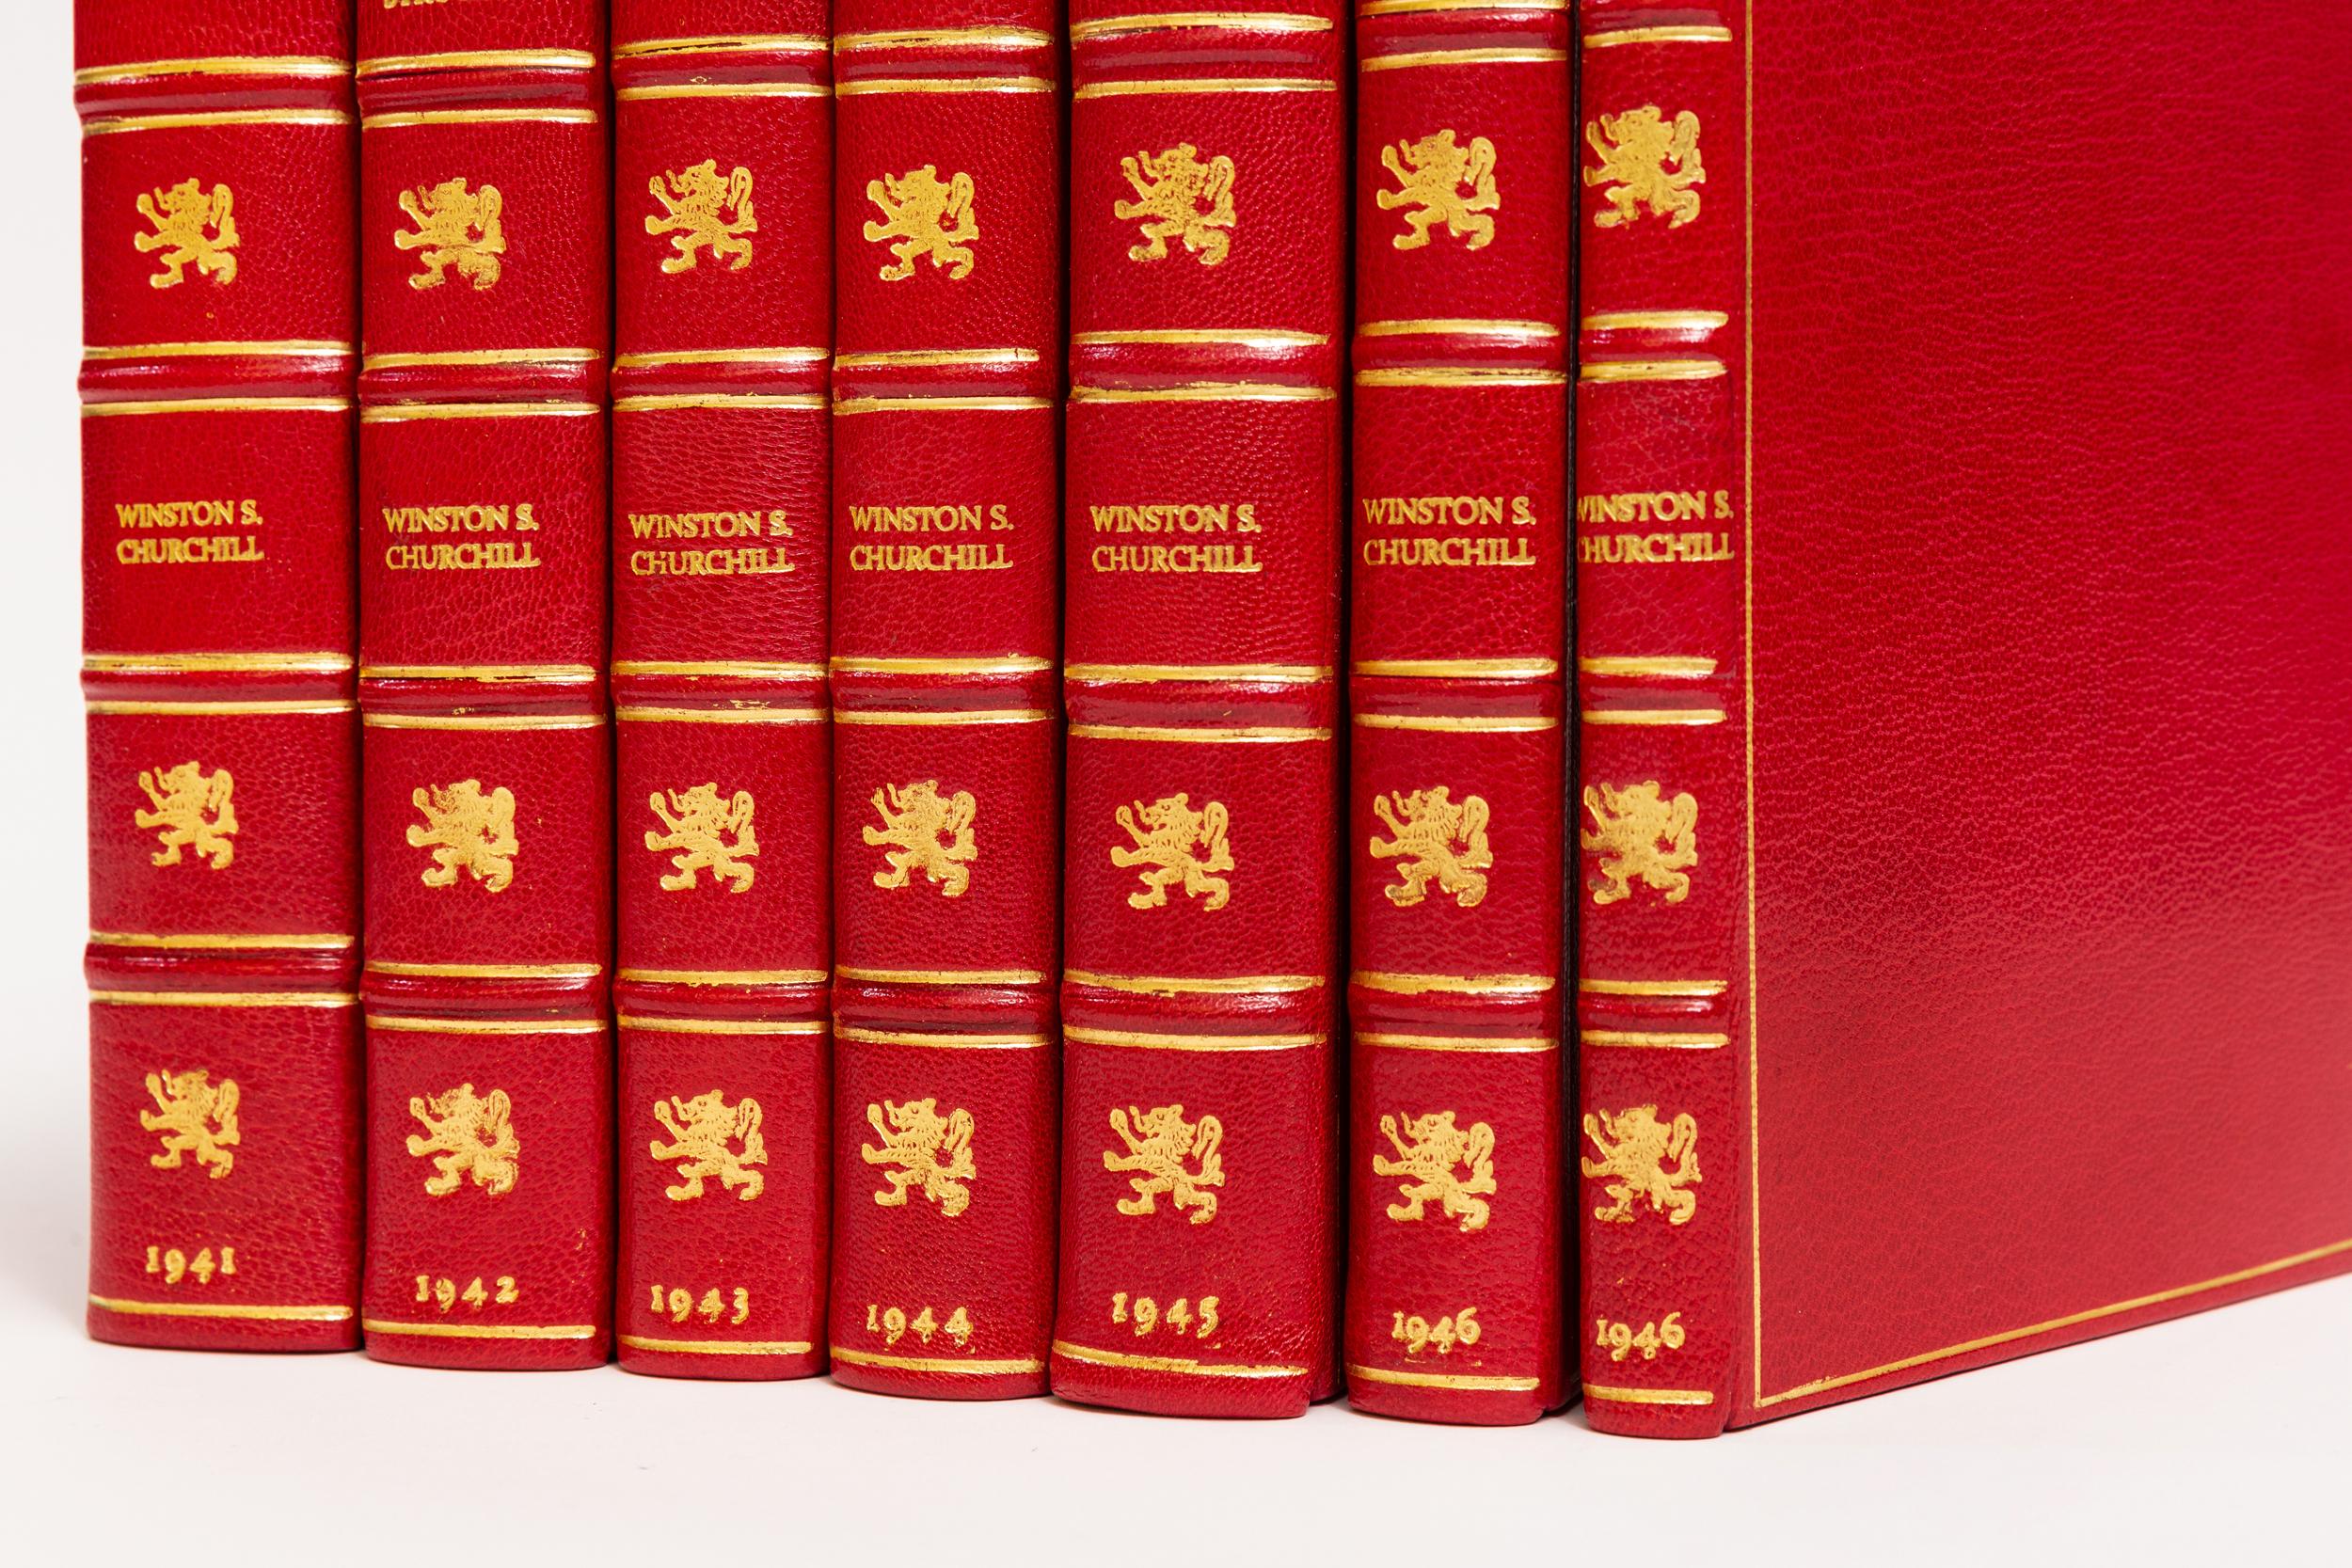 7 Volumes. Winston S. Churchill, The War Speeches.Bound in full red morocco. Gilt tooling on covers. All edges gilt. Raised bands. Decorative gilt emblems on spine. Illustrated. Half-tone frontispiece. Includes War Speeches. First edition.